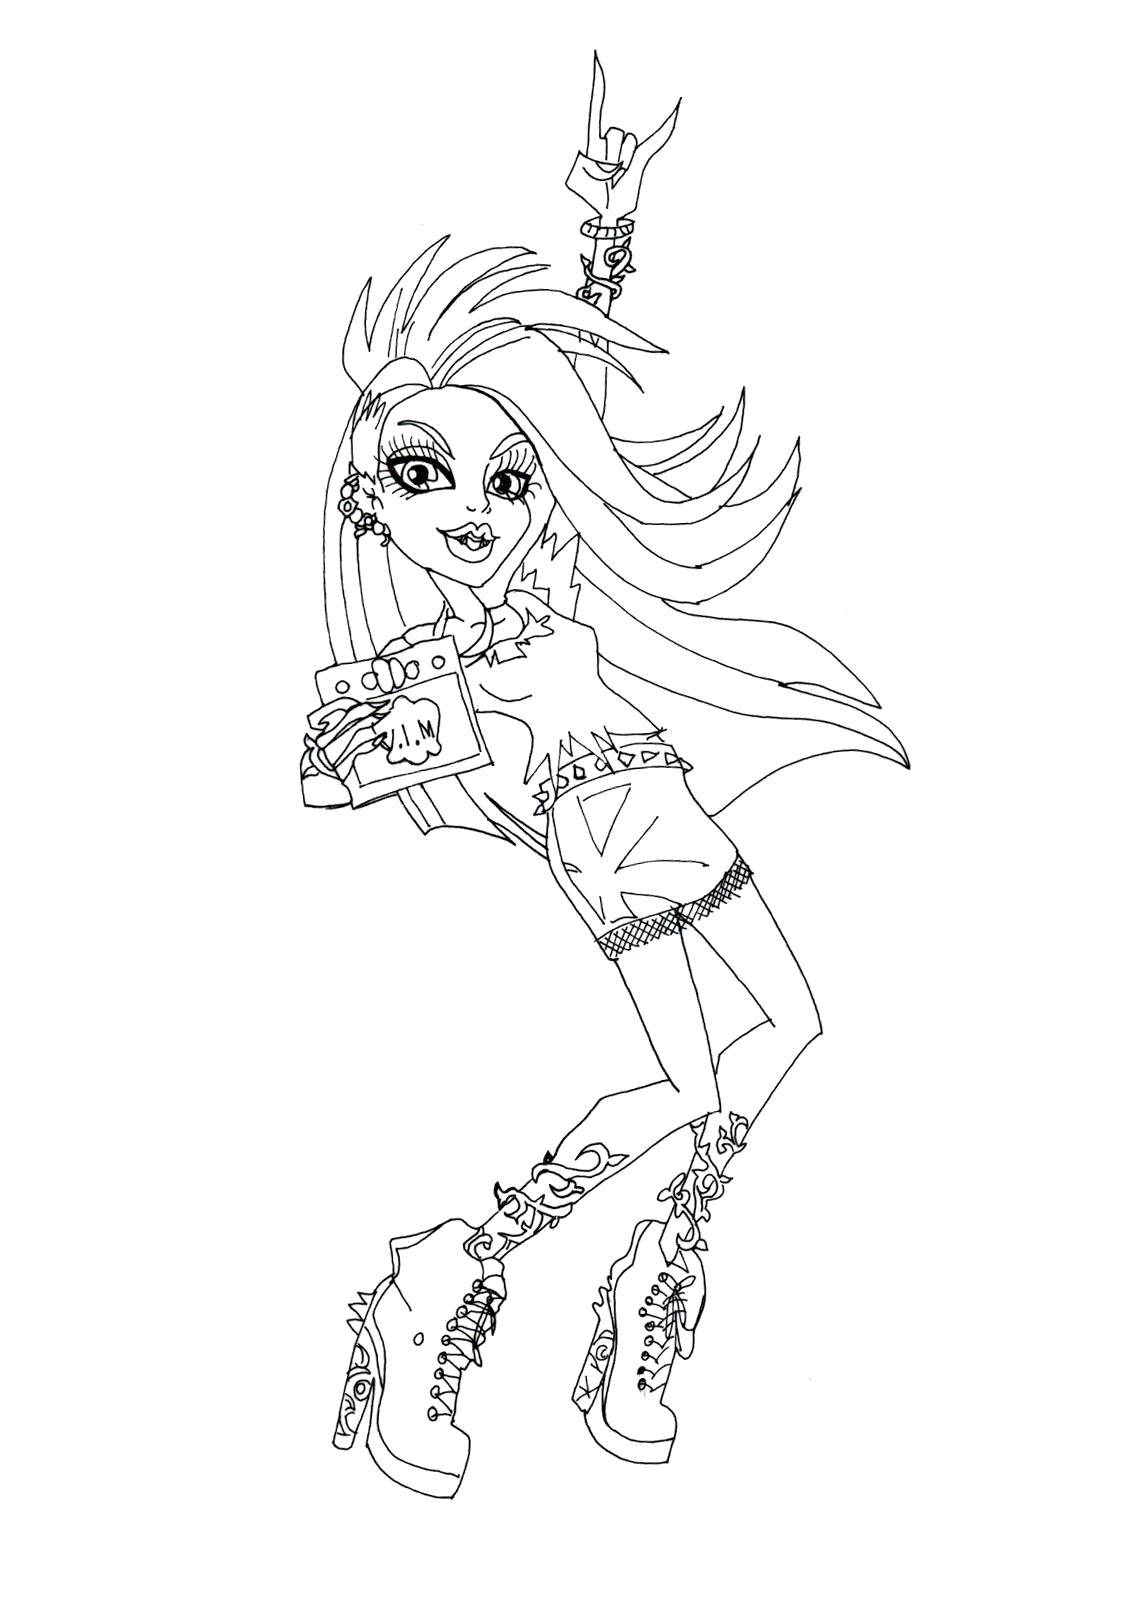 Coloring Rocker. Category school of monsters. Tags:  Monster High.